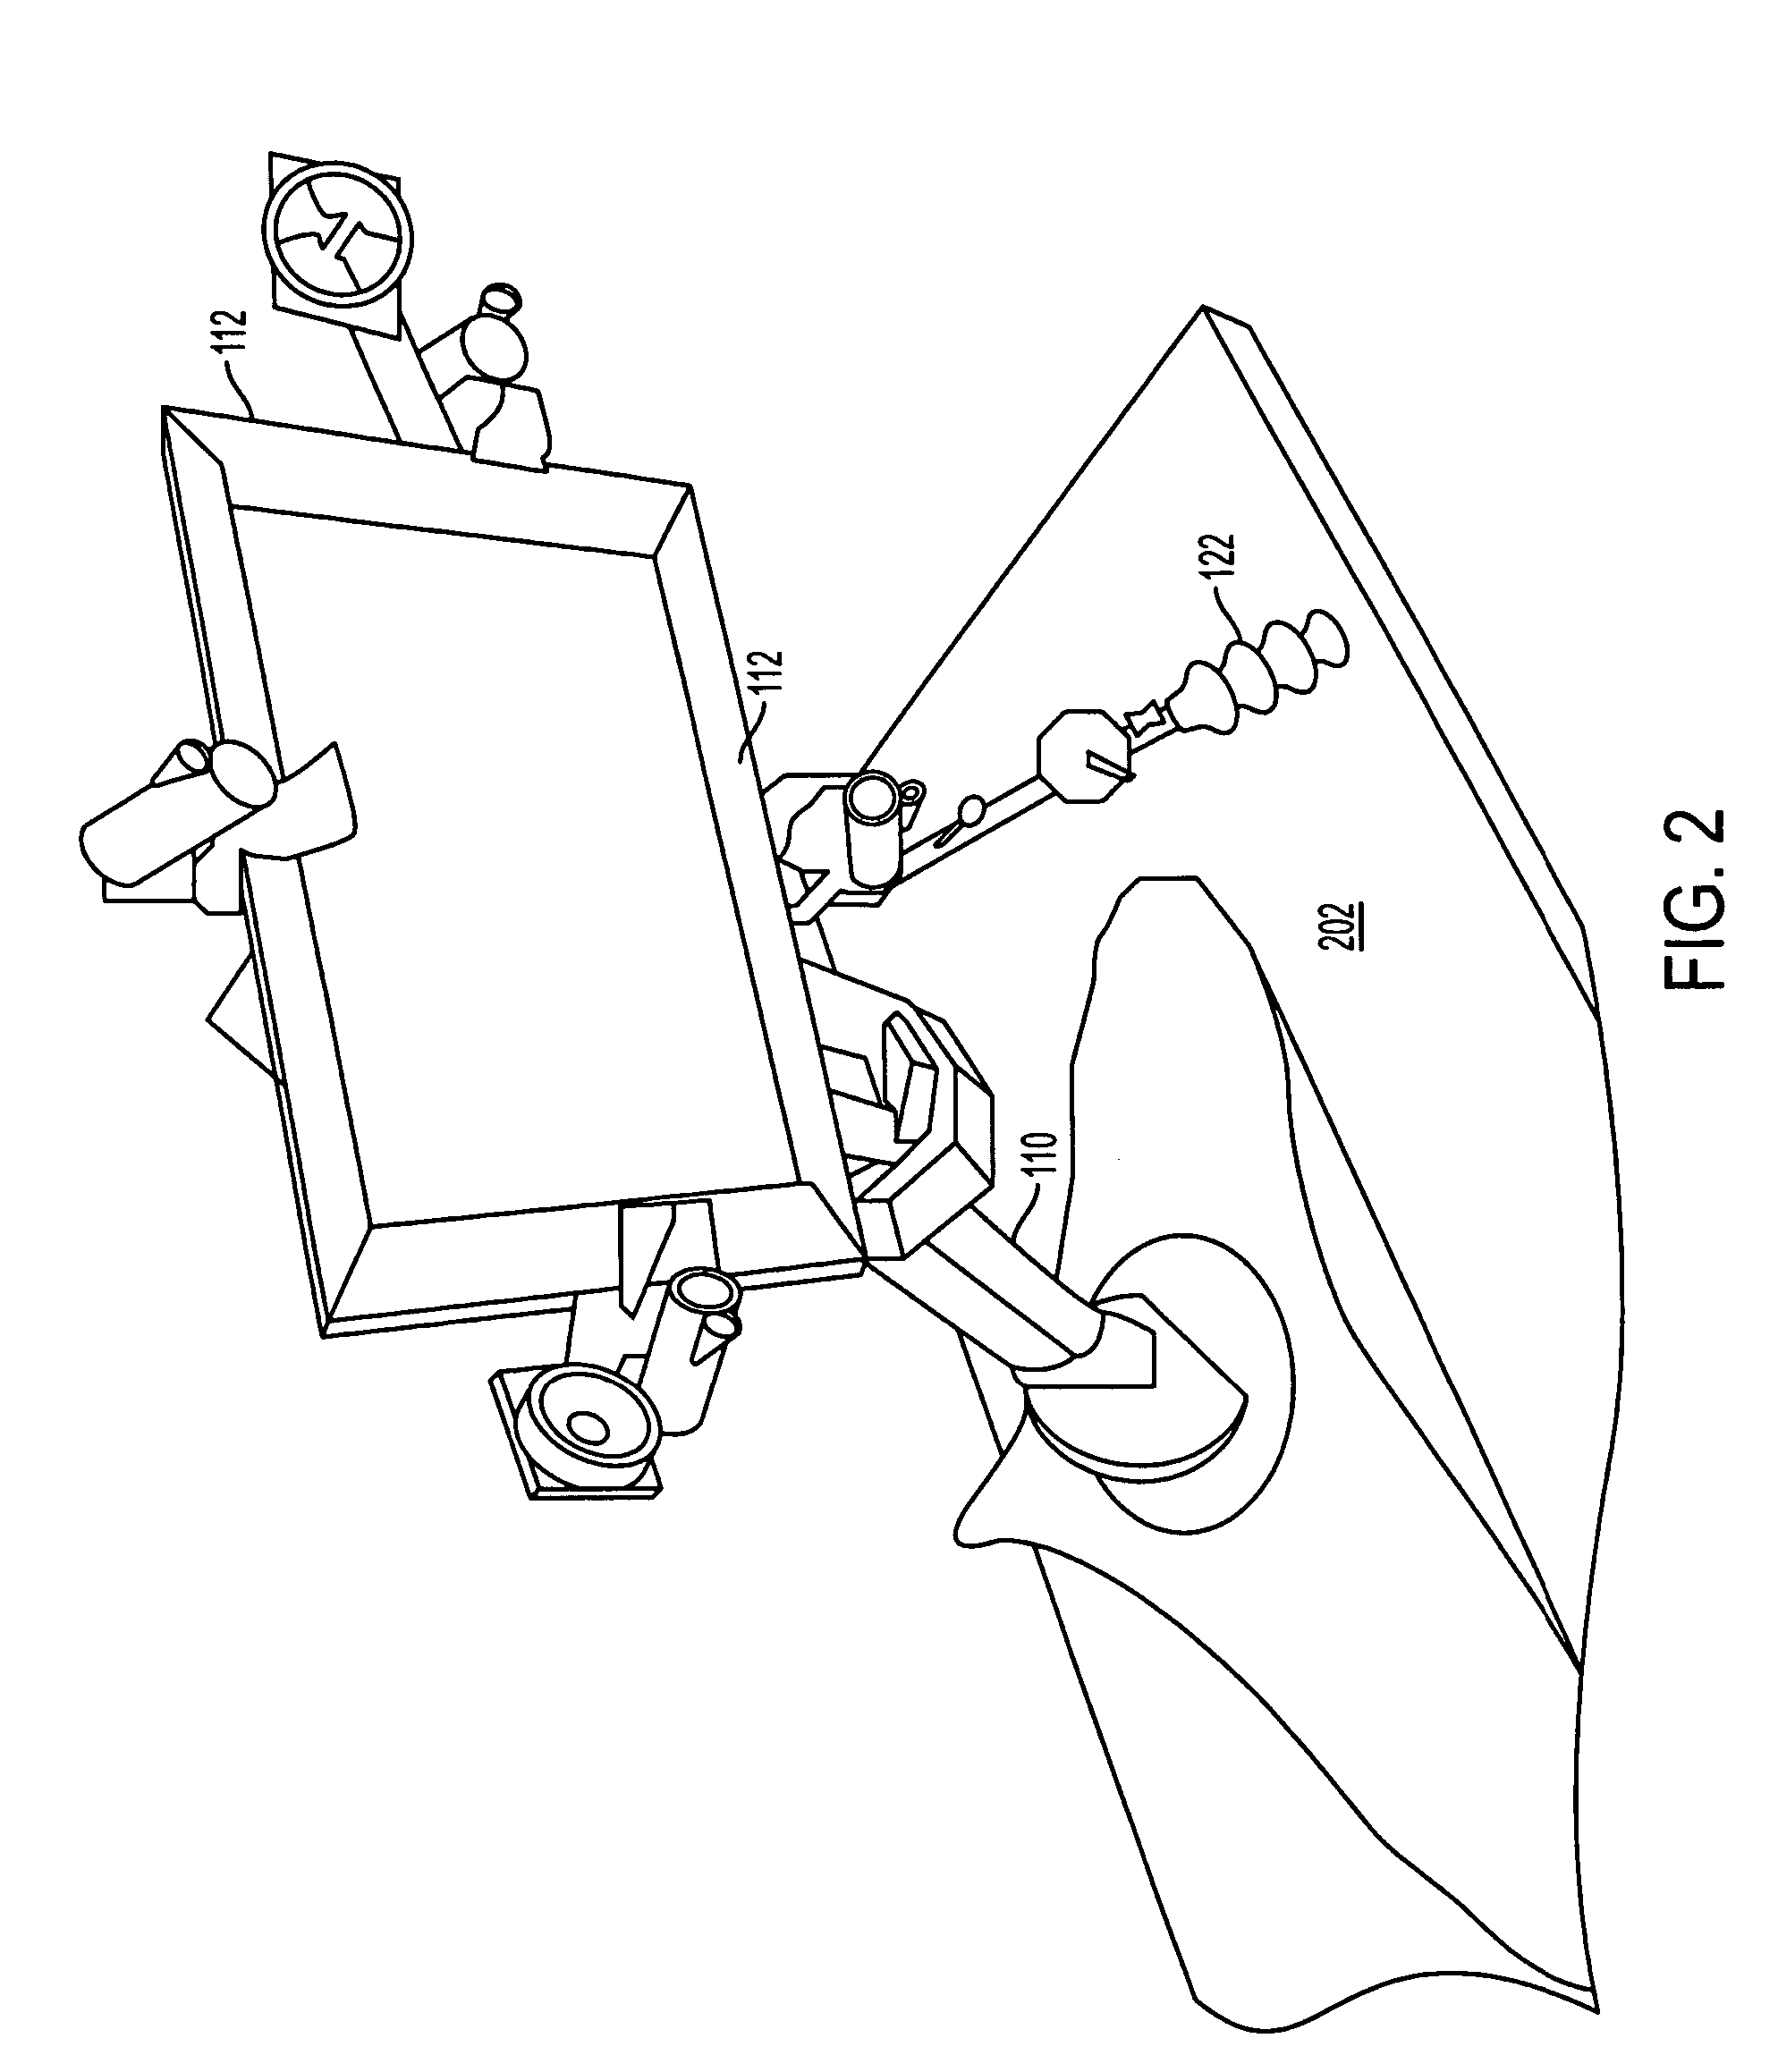 Movable audio/video communication interface system